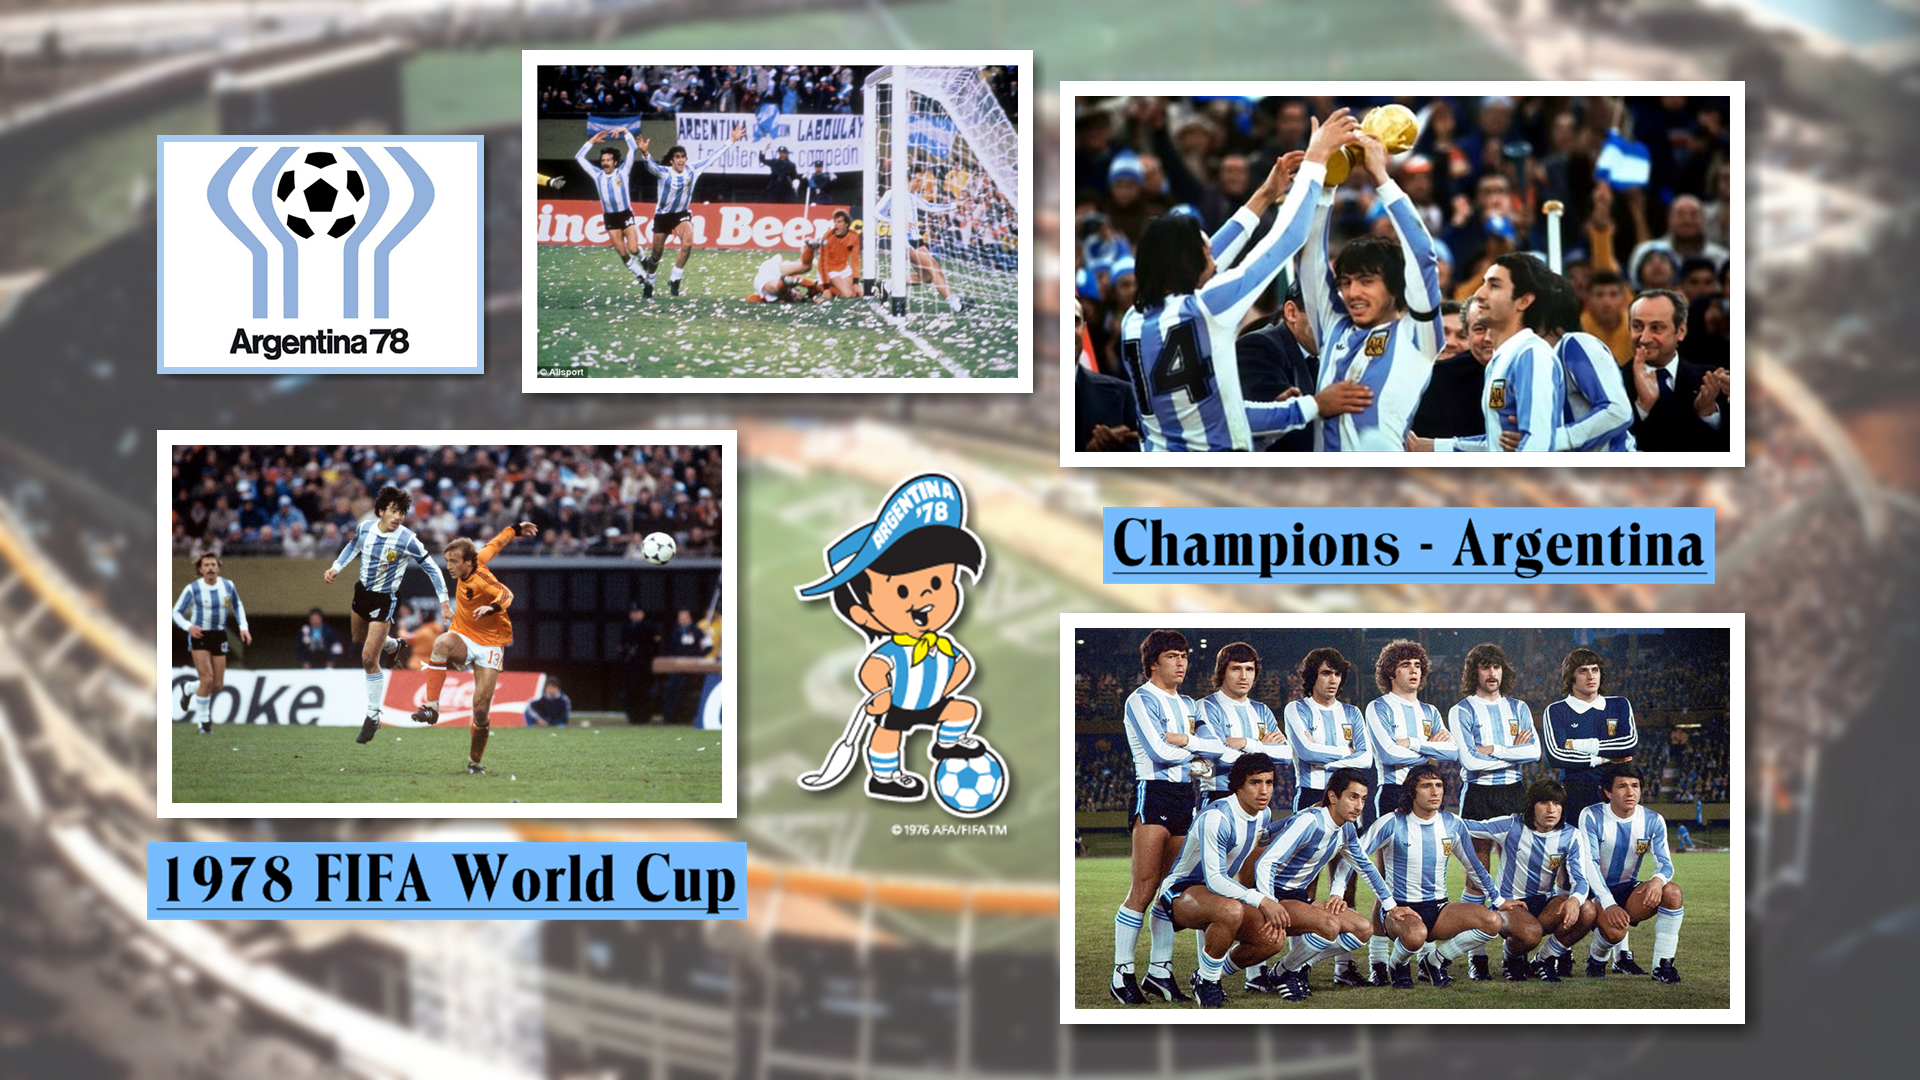 People 1920x1080 footballers soccer soccer player FIFA World Cup